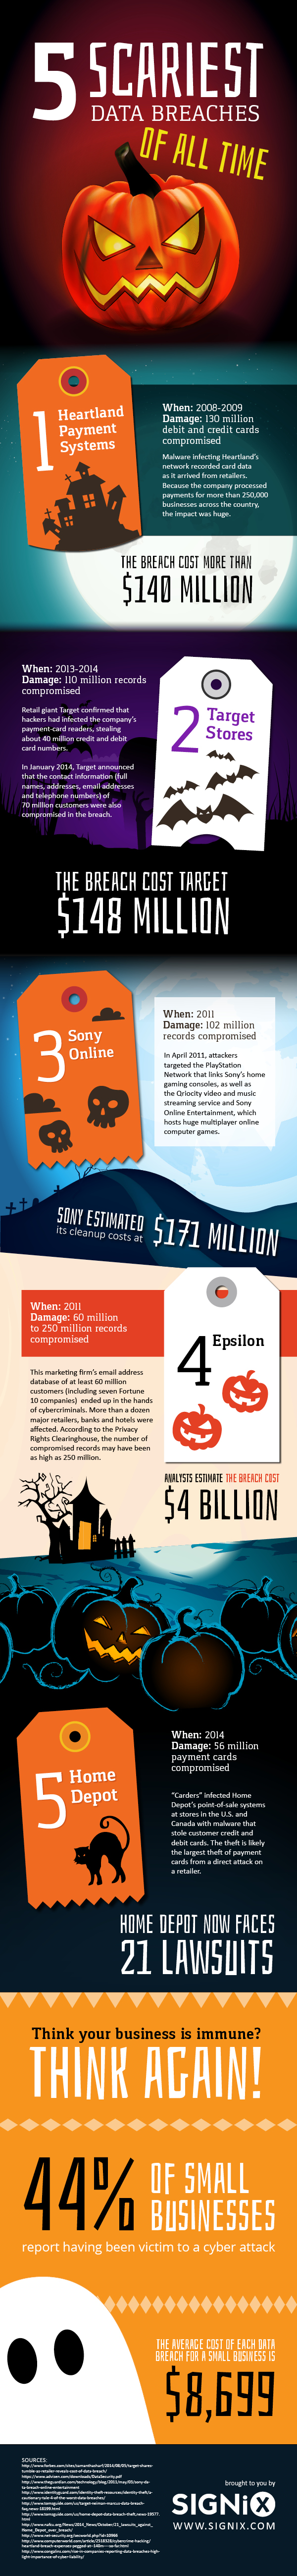 5 Scariest Data Breaches of All Time